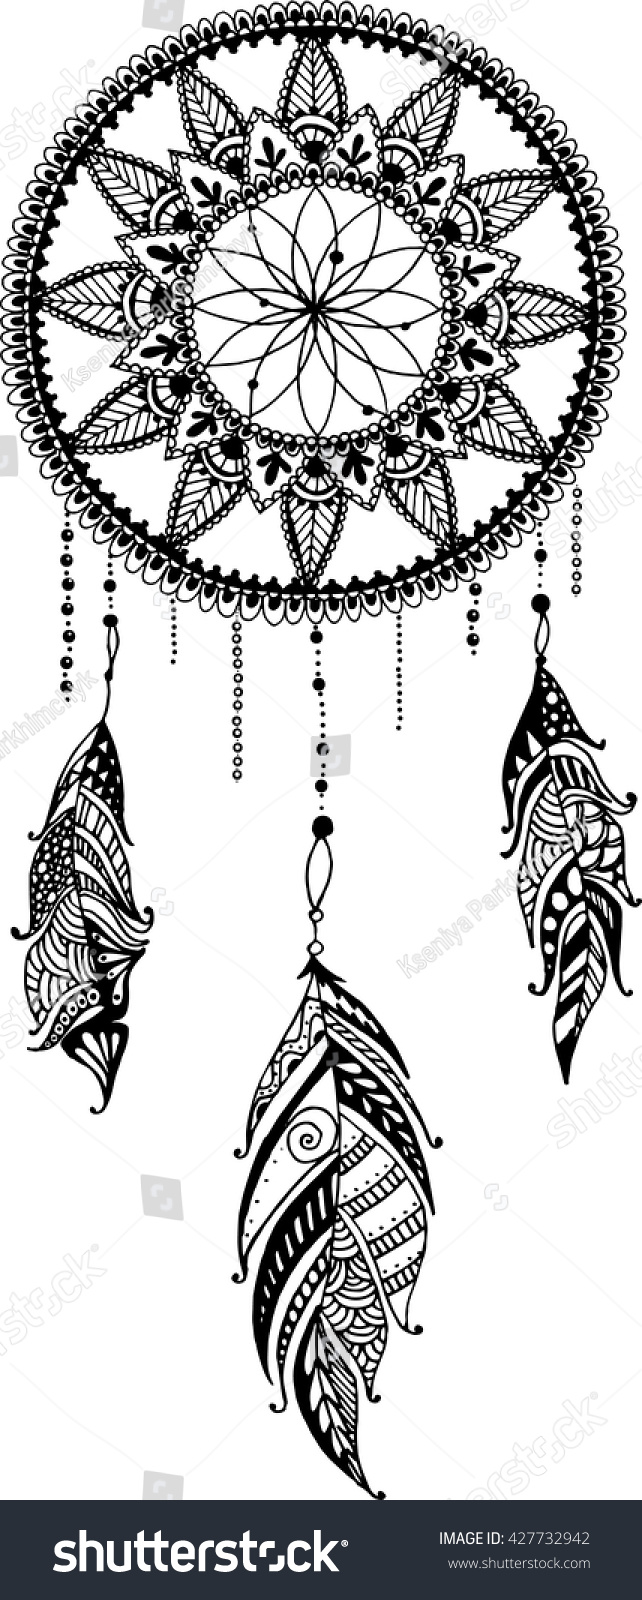 SVG of Hand-drawn mandala dreamcatcher with feathers. Ethnic illustration, tribal, American Indians traditional symbol. svg